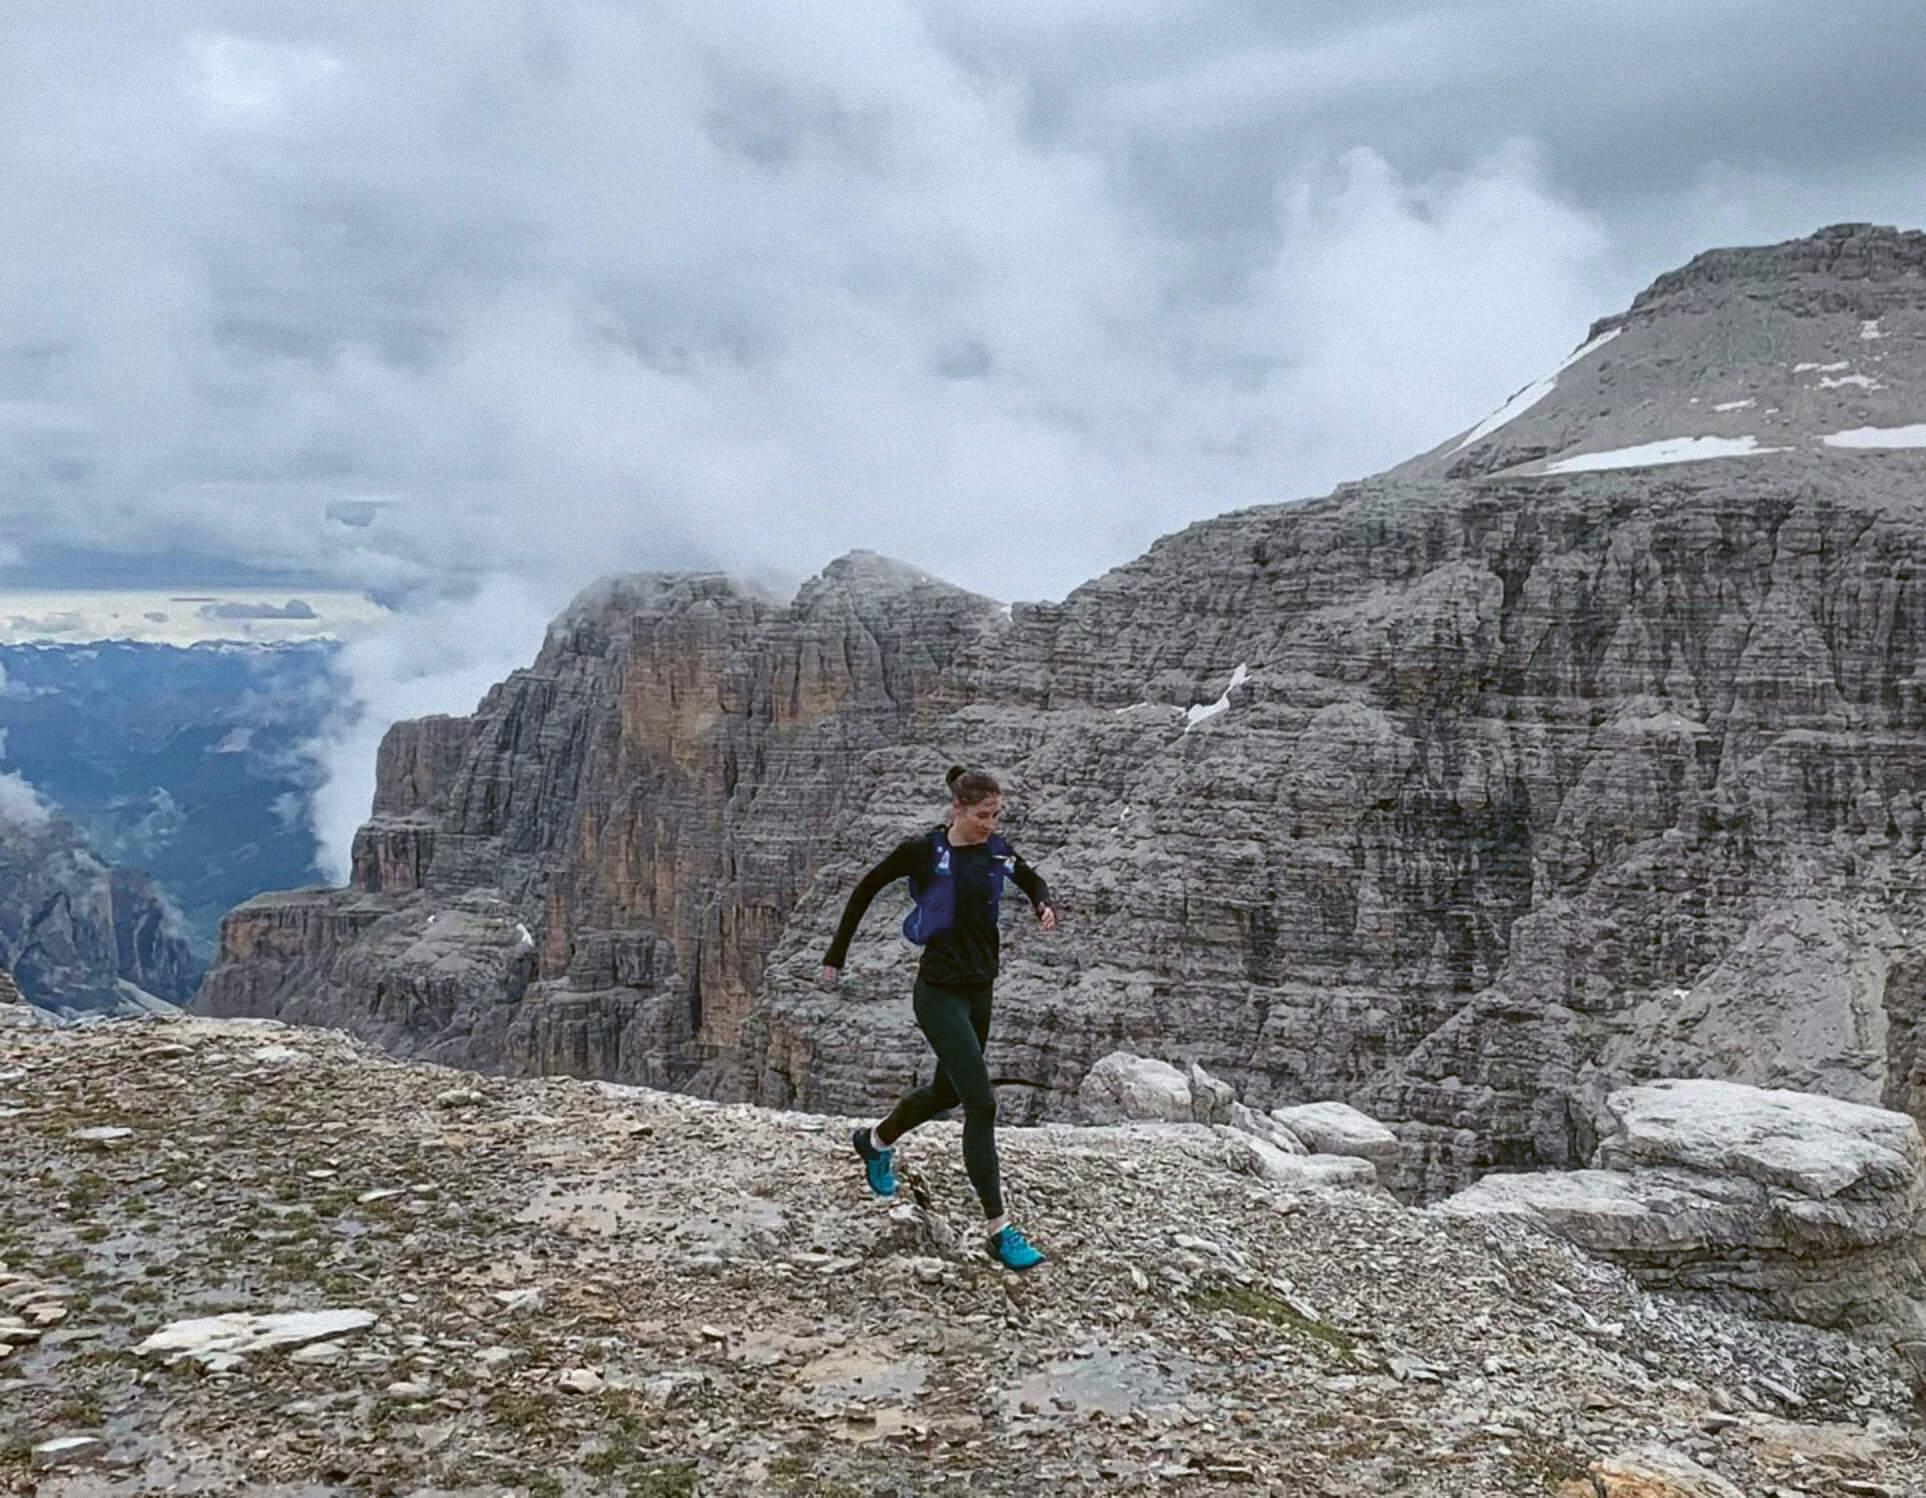 Running on the path of the famous Skyrace in Val di Fassa.